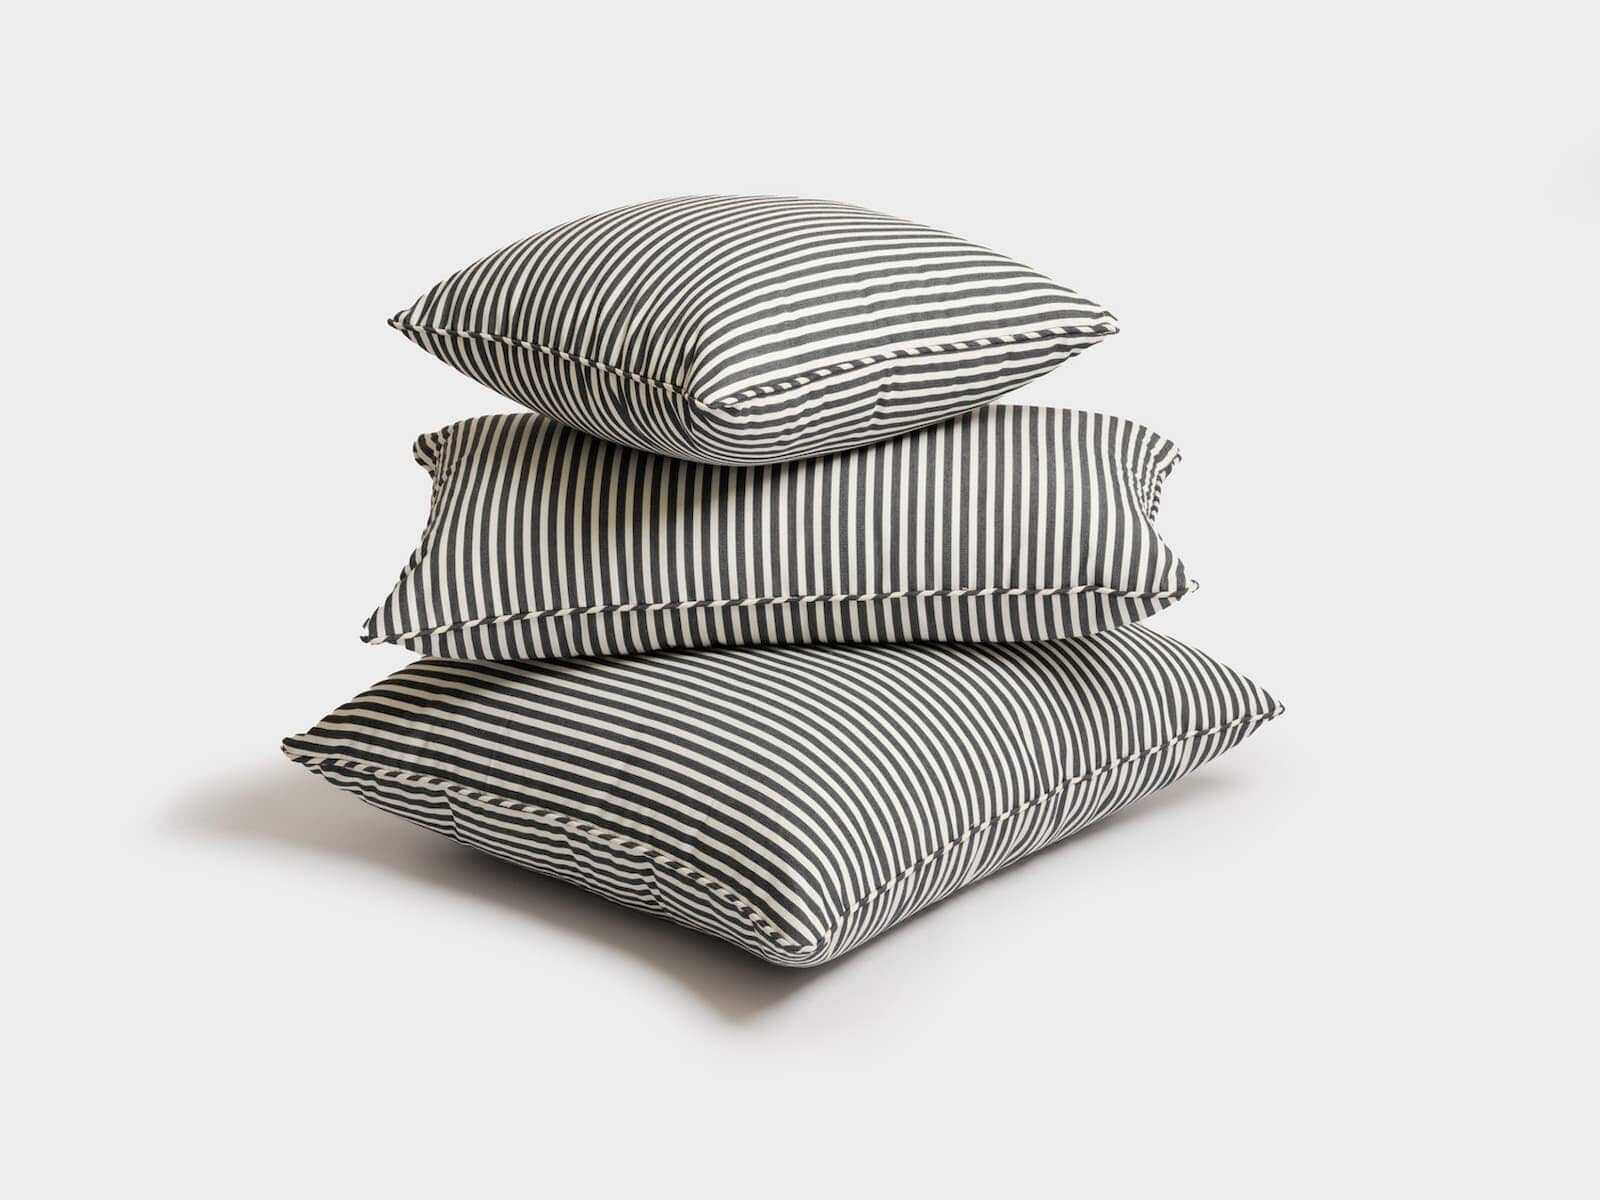 Studio image of navy stripe euro pillow, square pillow and rectangle pillow